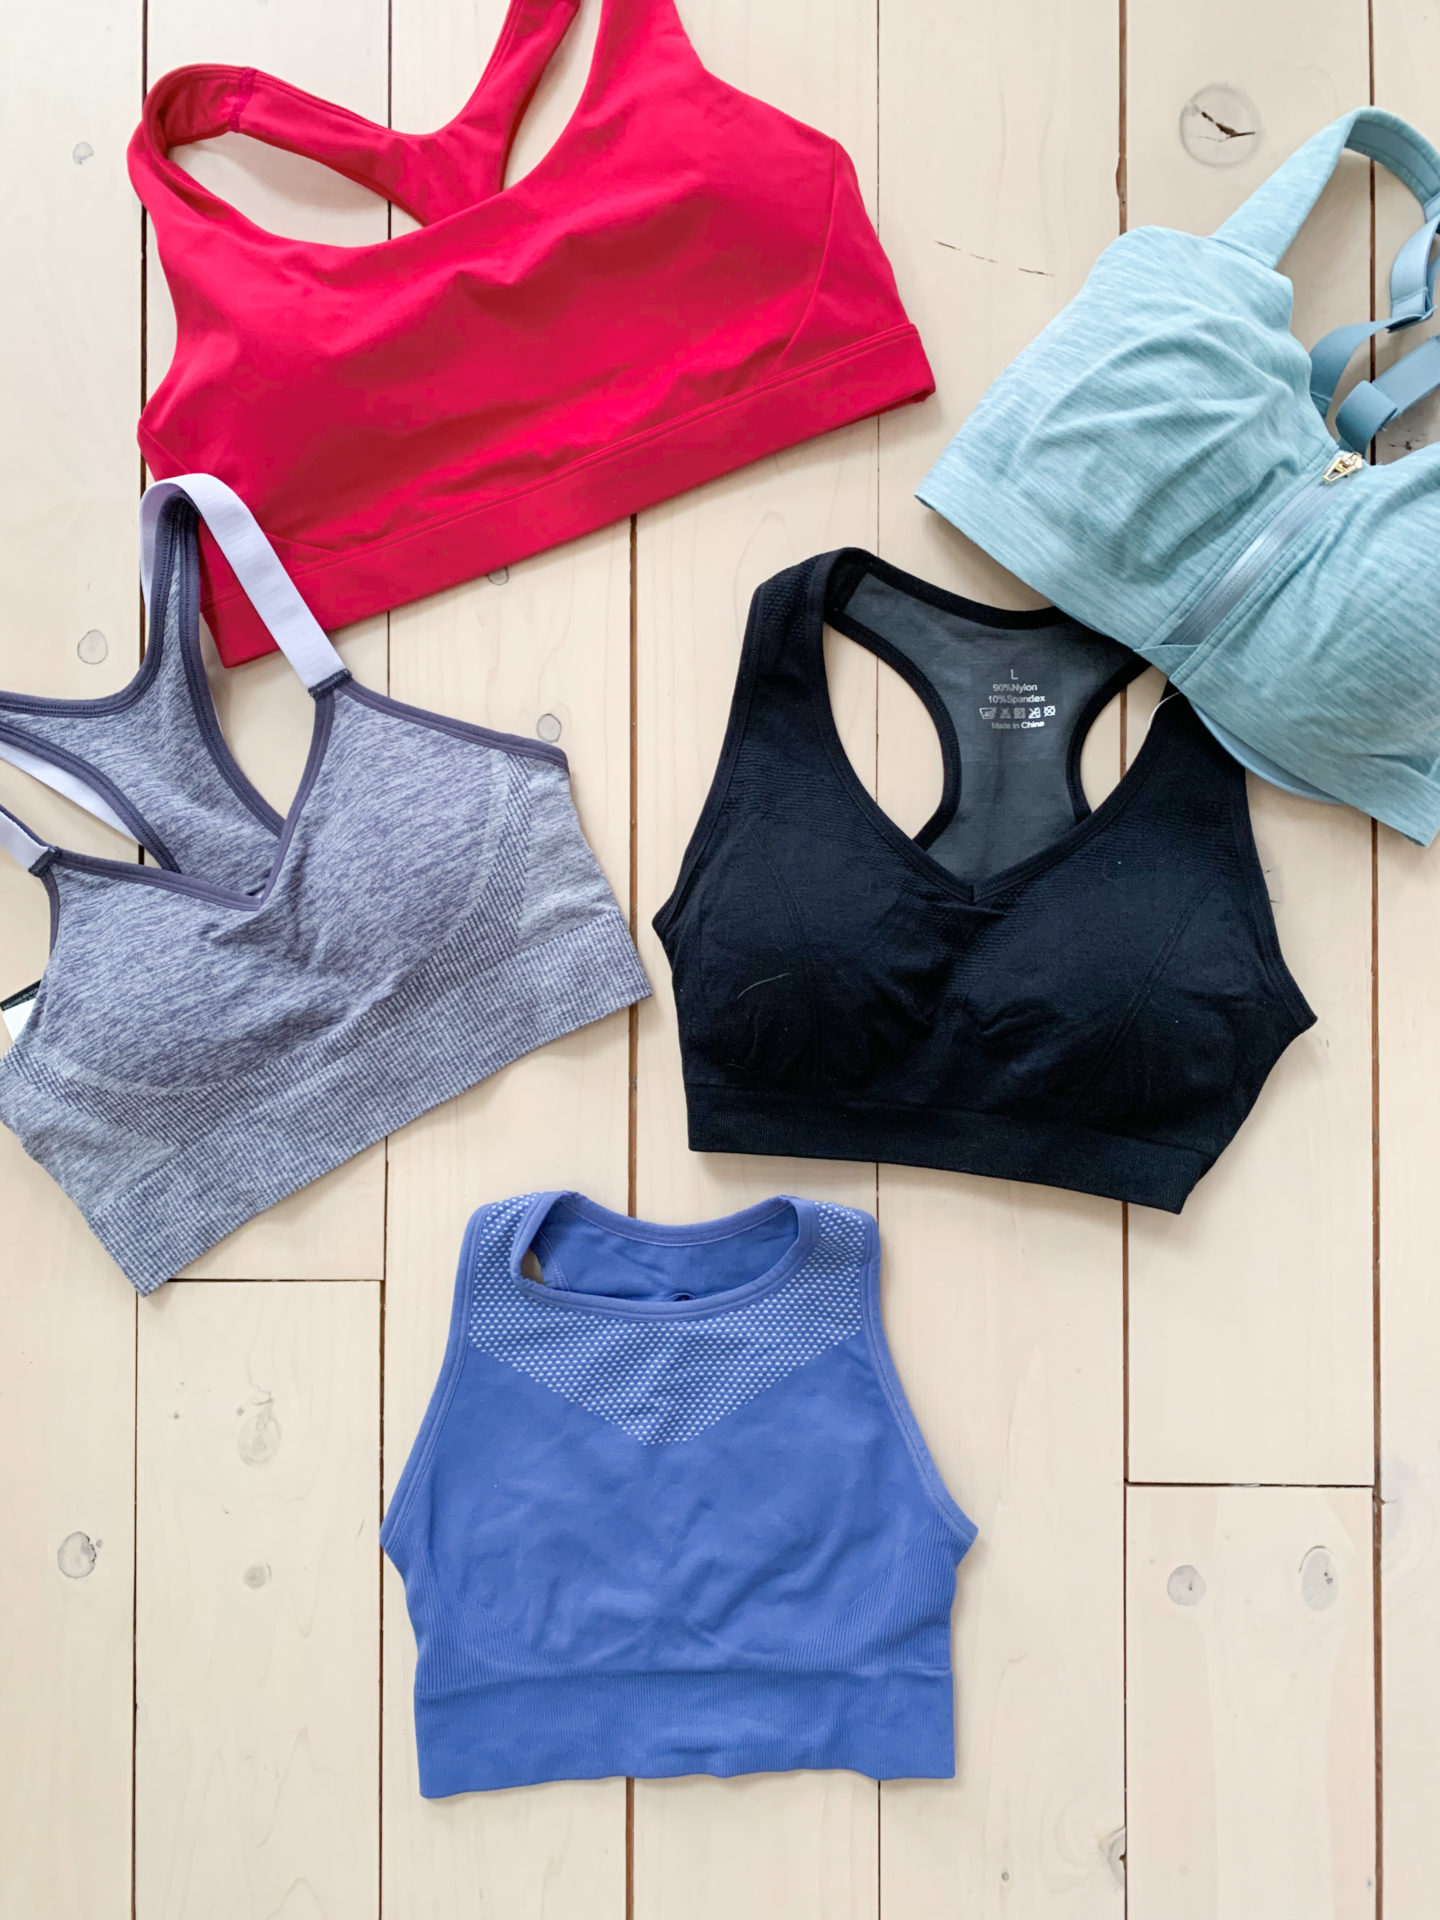 How to find your perfect sports bra